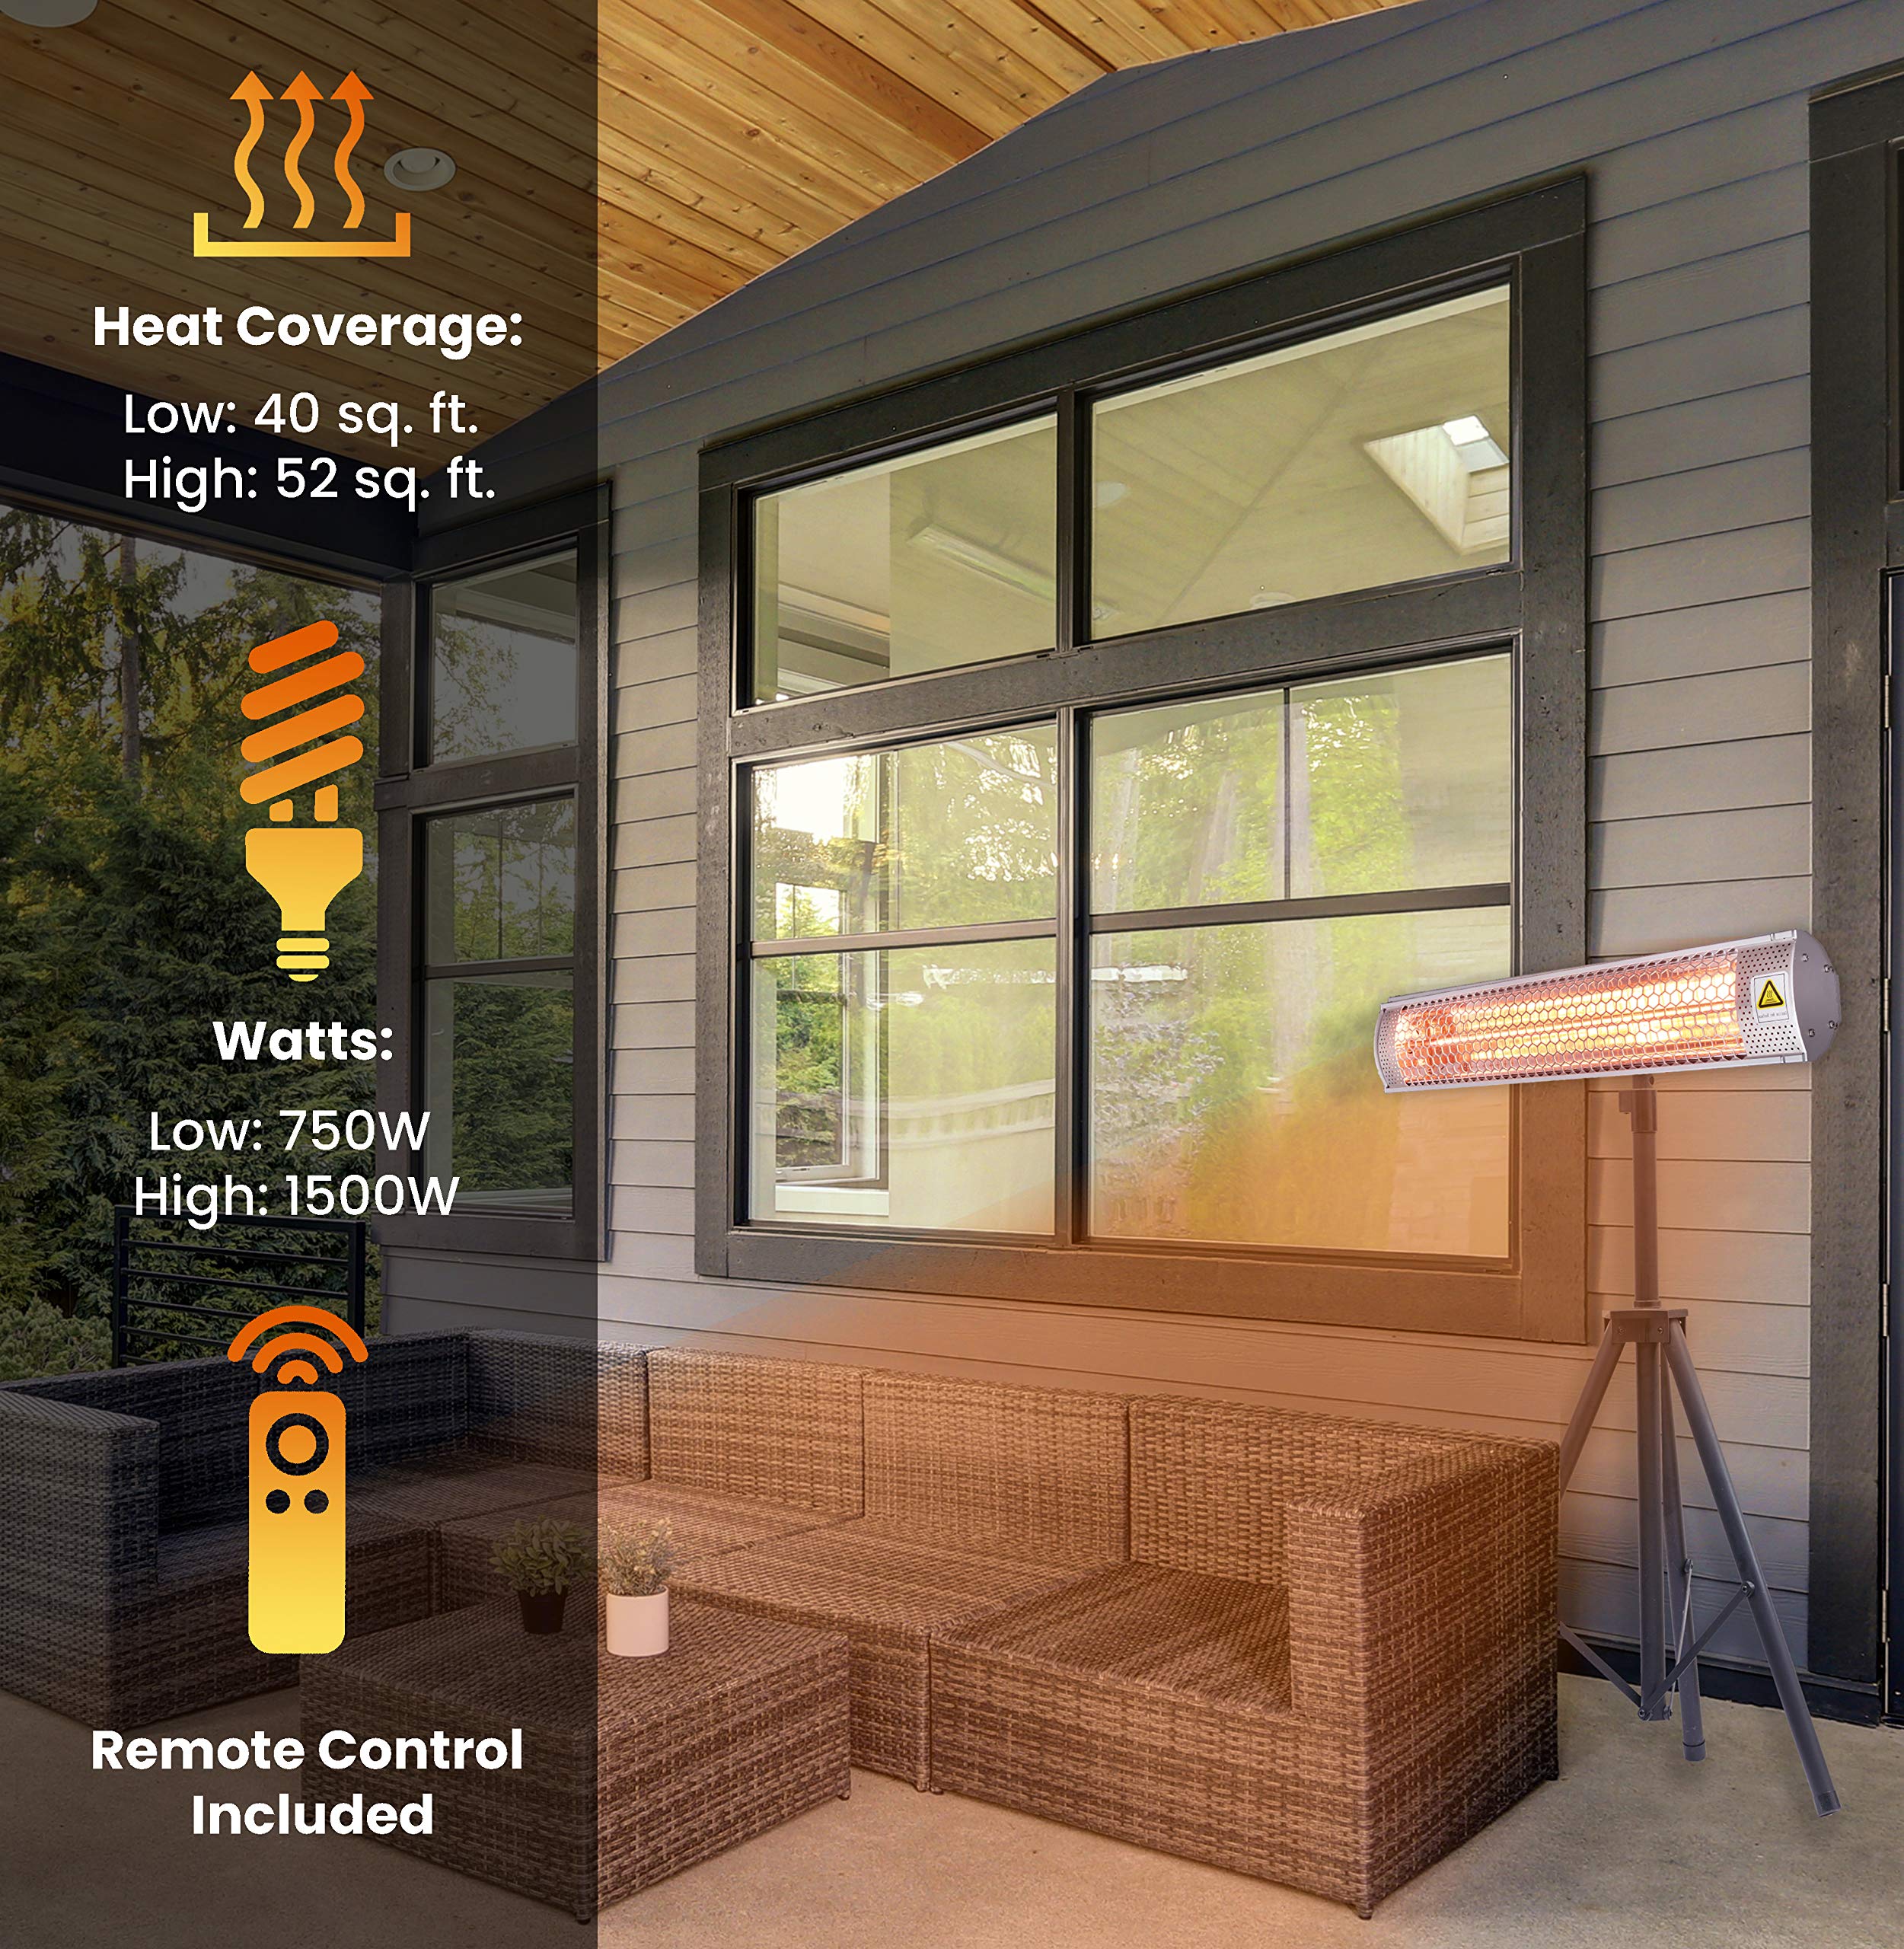 Hanover 1500W 26.5'' Portable Electric Infrared Halogen Heat Lamp with Mounting Bracket and Tri-Pod Stand | Powerful Heating for Outdoor Areas up to 52 Sq. Ft. | Ideal for Porch, Garage, Workshop